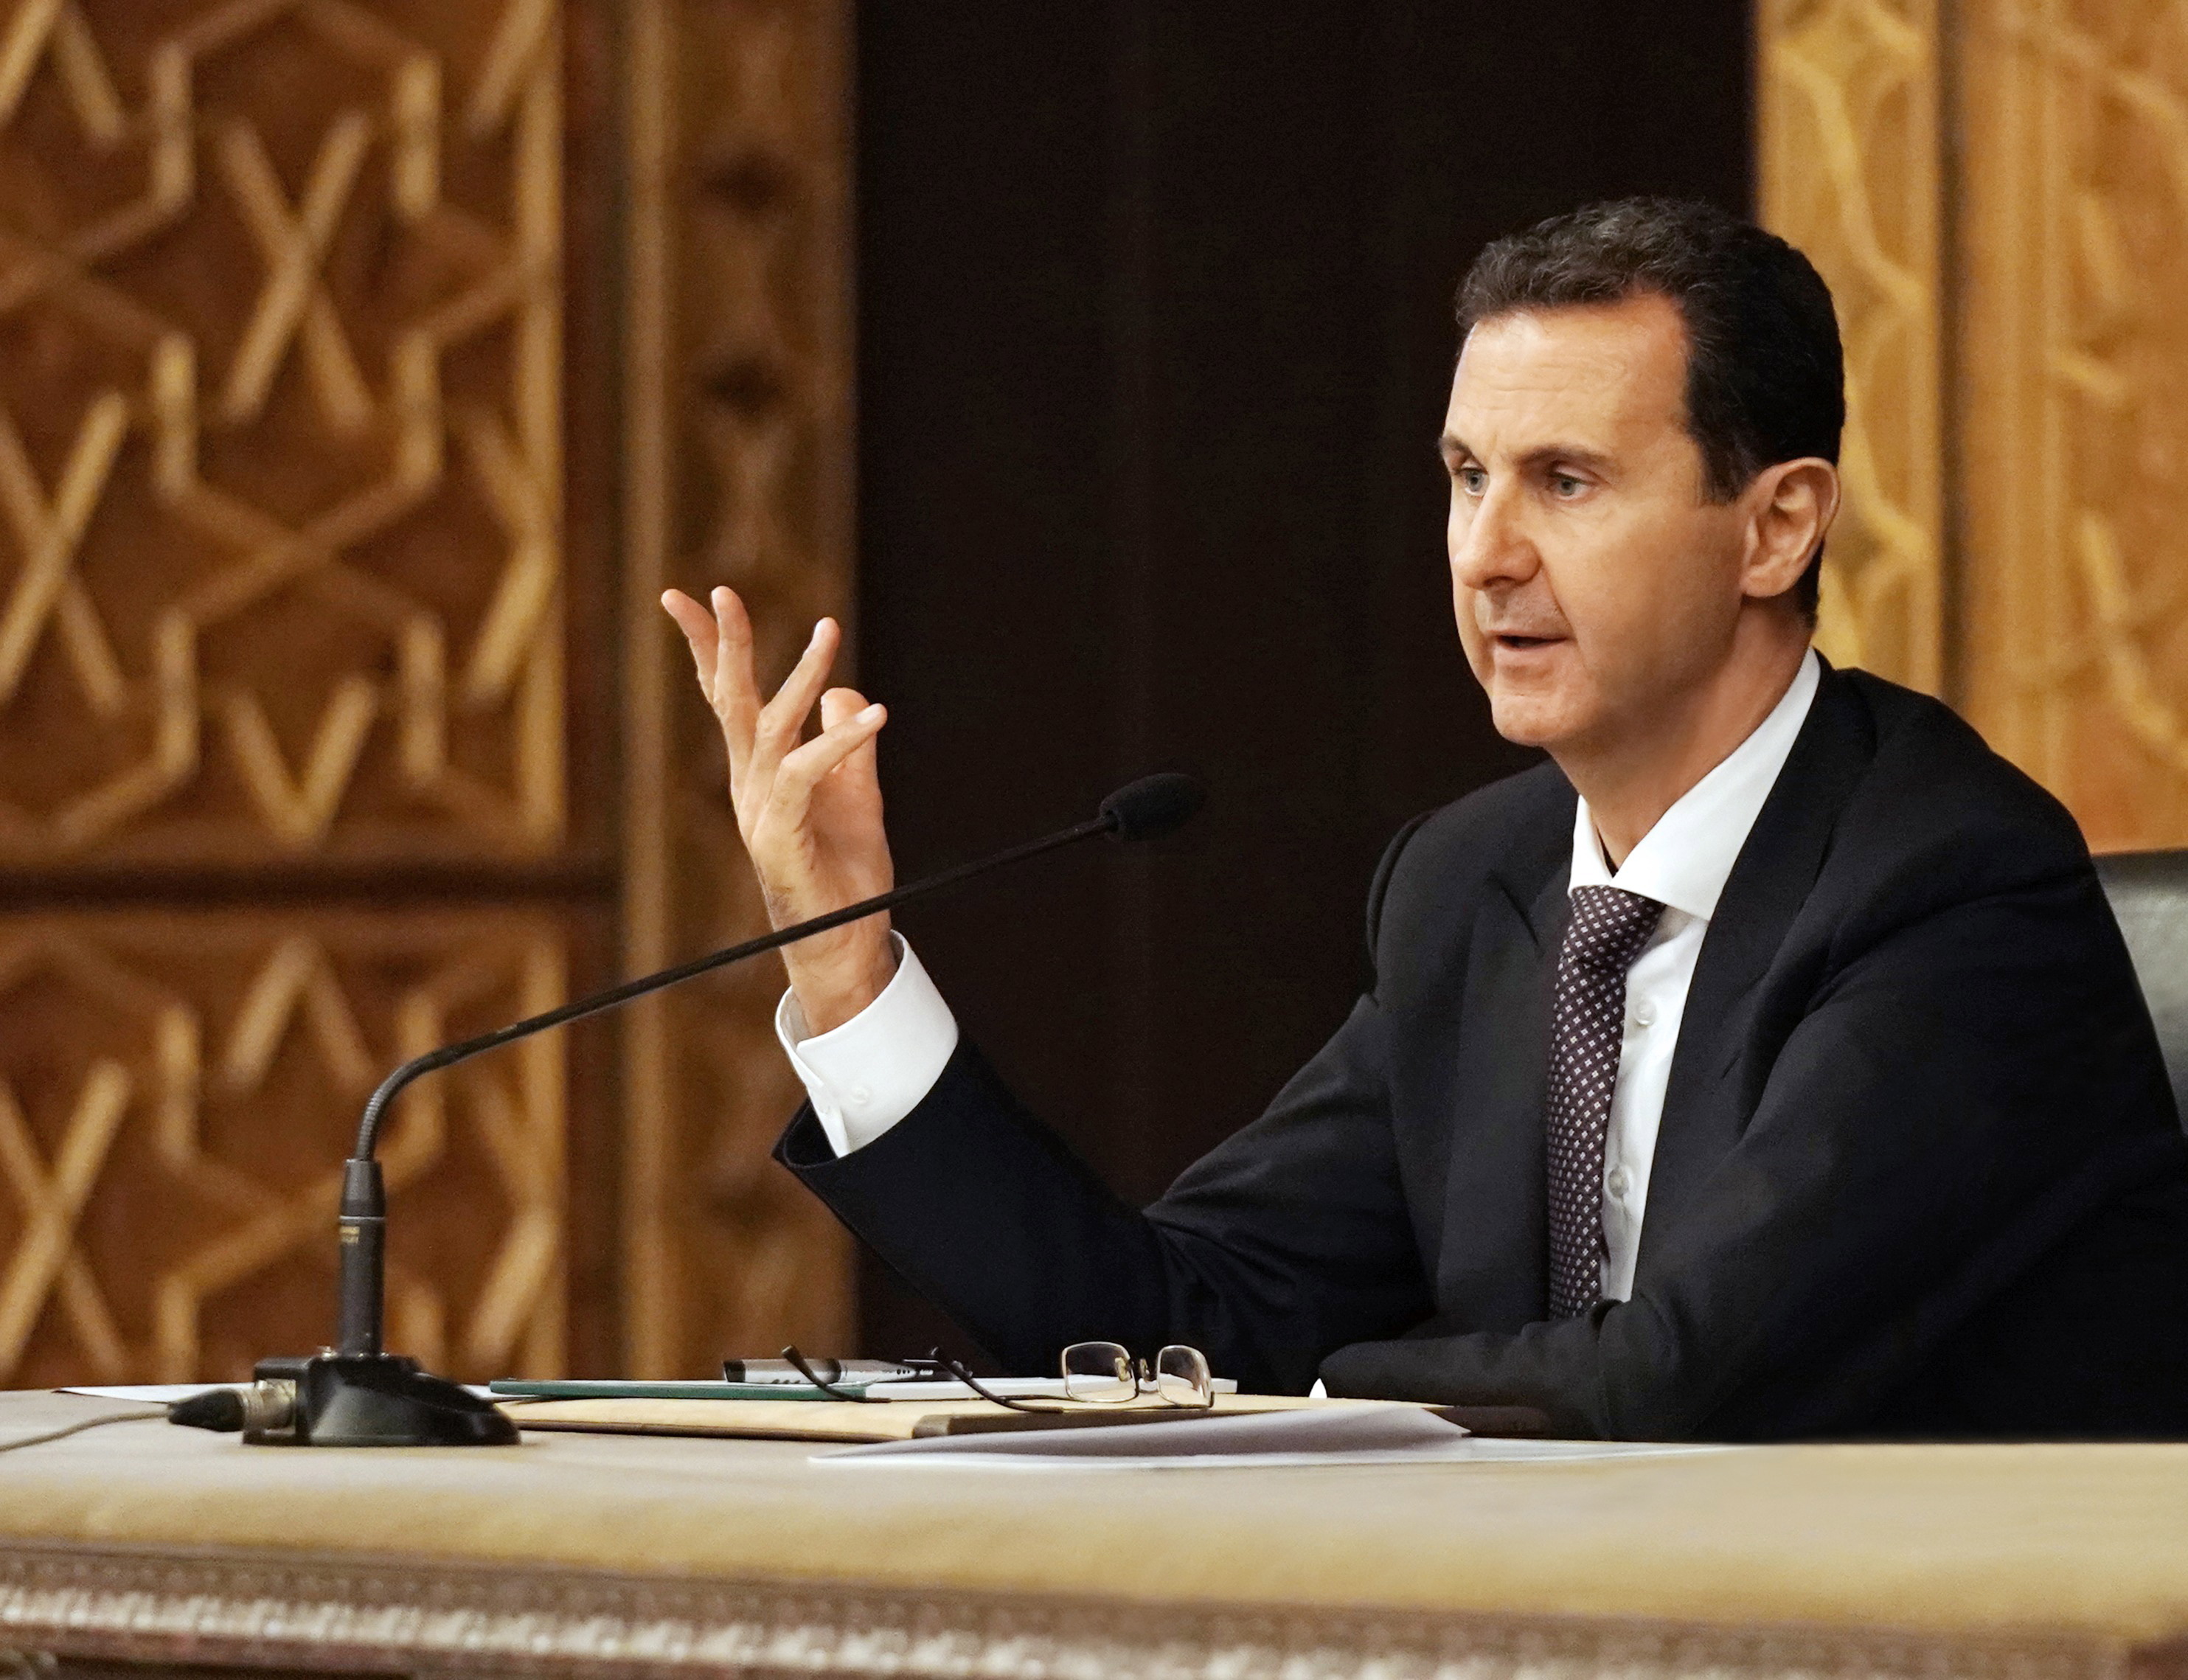 epa07077198 A handout photo made available by Syrian Arab News Agency (SANA)  shows Syrian President Bashar Assad chairing a meeting of the Central Committee of al-Baath Arab Socialist Party in Damascus, Syria, 07 October 2018. According to SANA, Assad said the 'Idleb agreement' was a temporary measure through which the state has achieved many gains and foremost stemming bloodshed, noting that this province and other Syrian territory will return to the Syrian state.  EPA/SANA HANDOUT  HANDOUT EDITORIAL USE ONLY/NO SALES